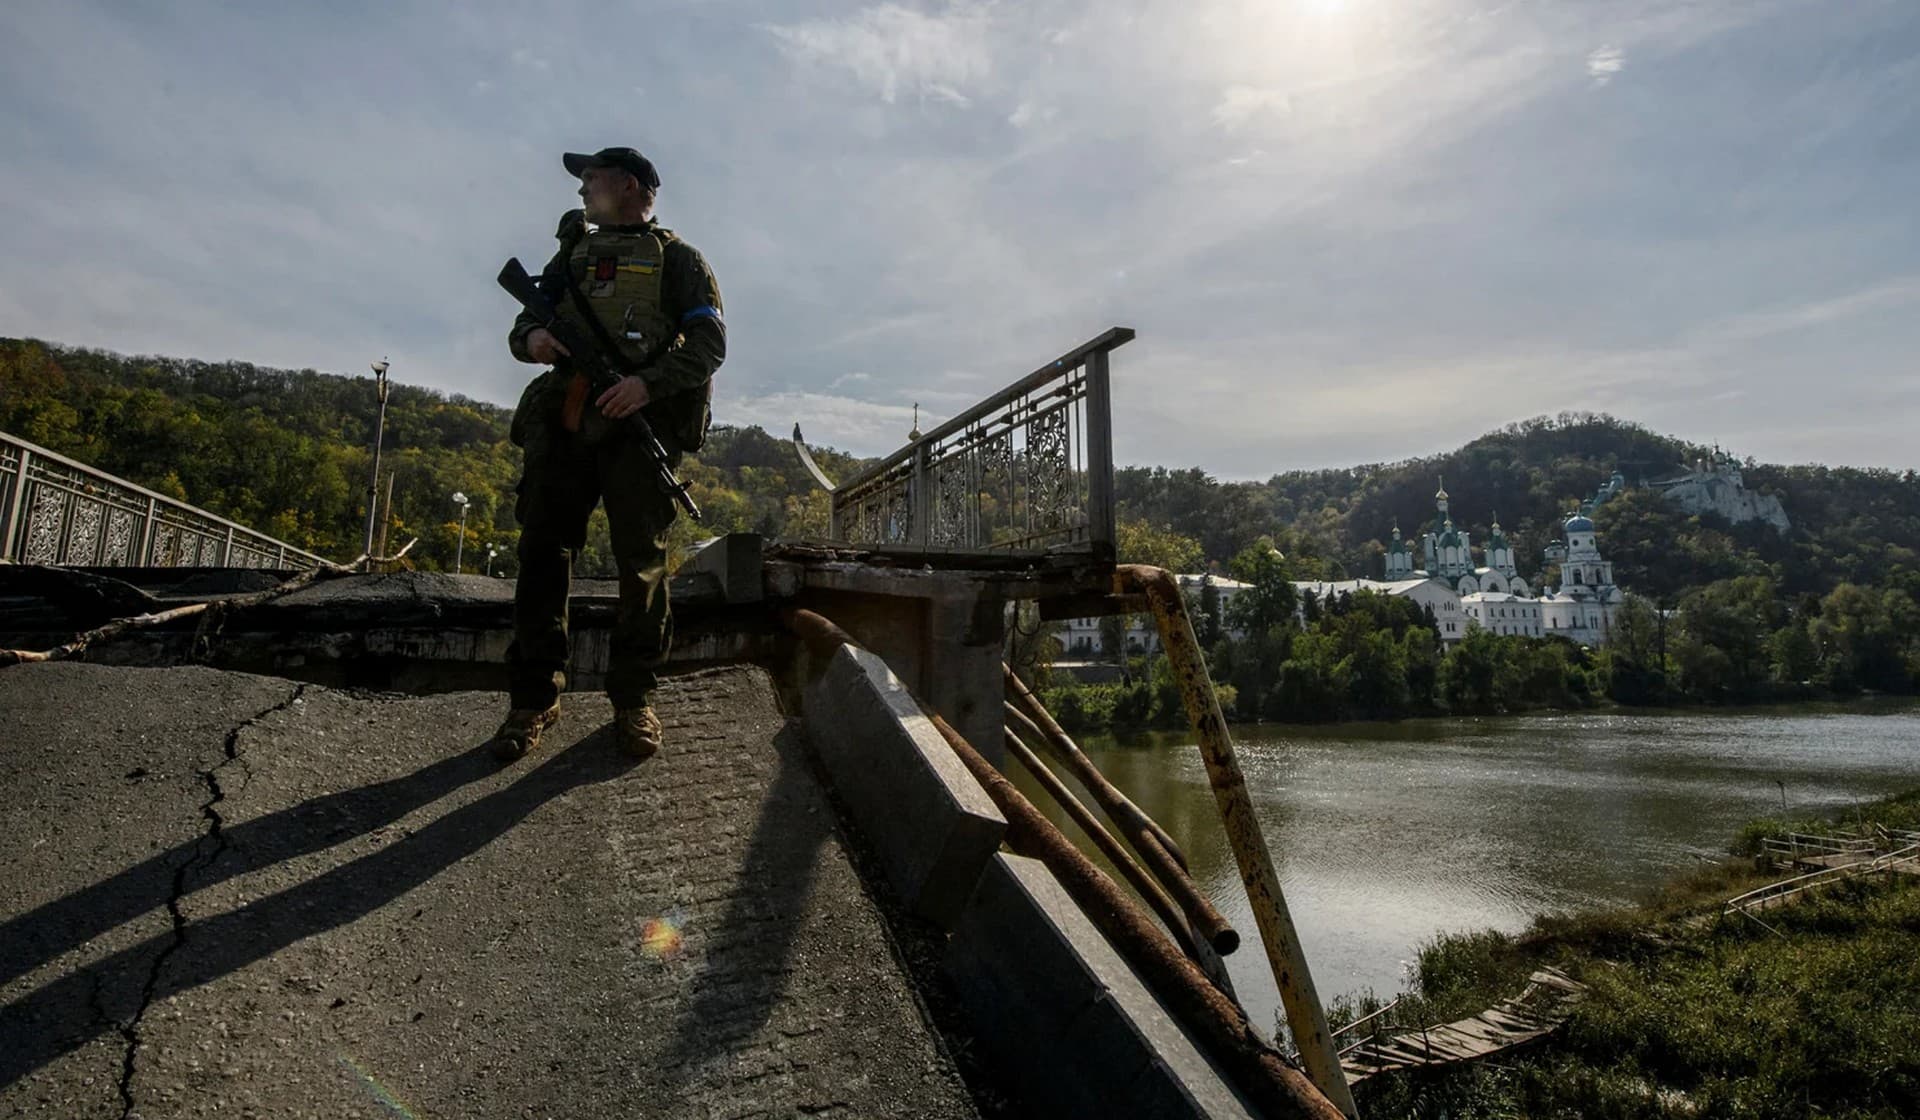 A service member of Ukraine's National Guard stands at a bridge over the Siverskyi Donets River destroyed during Russia's attack on Ukraine in the town of Sviatohirsk